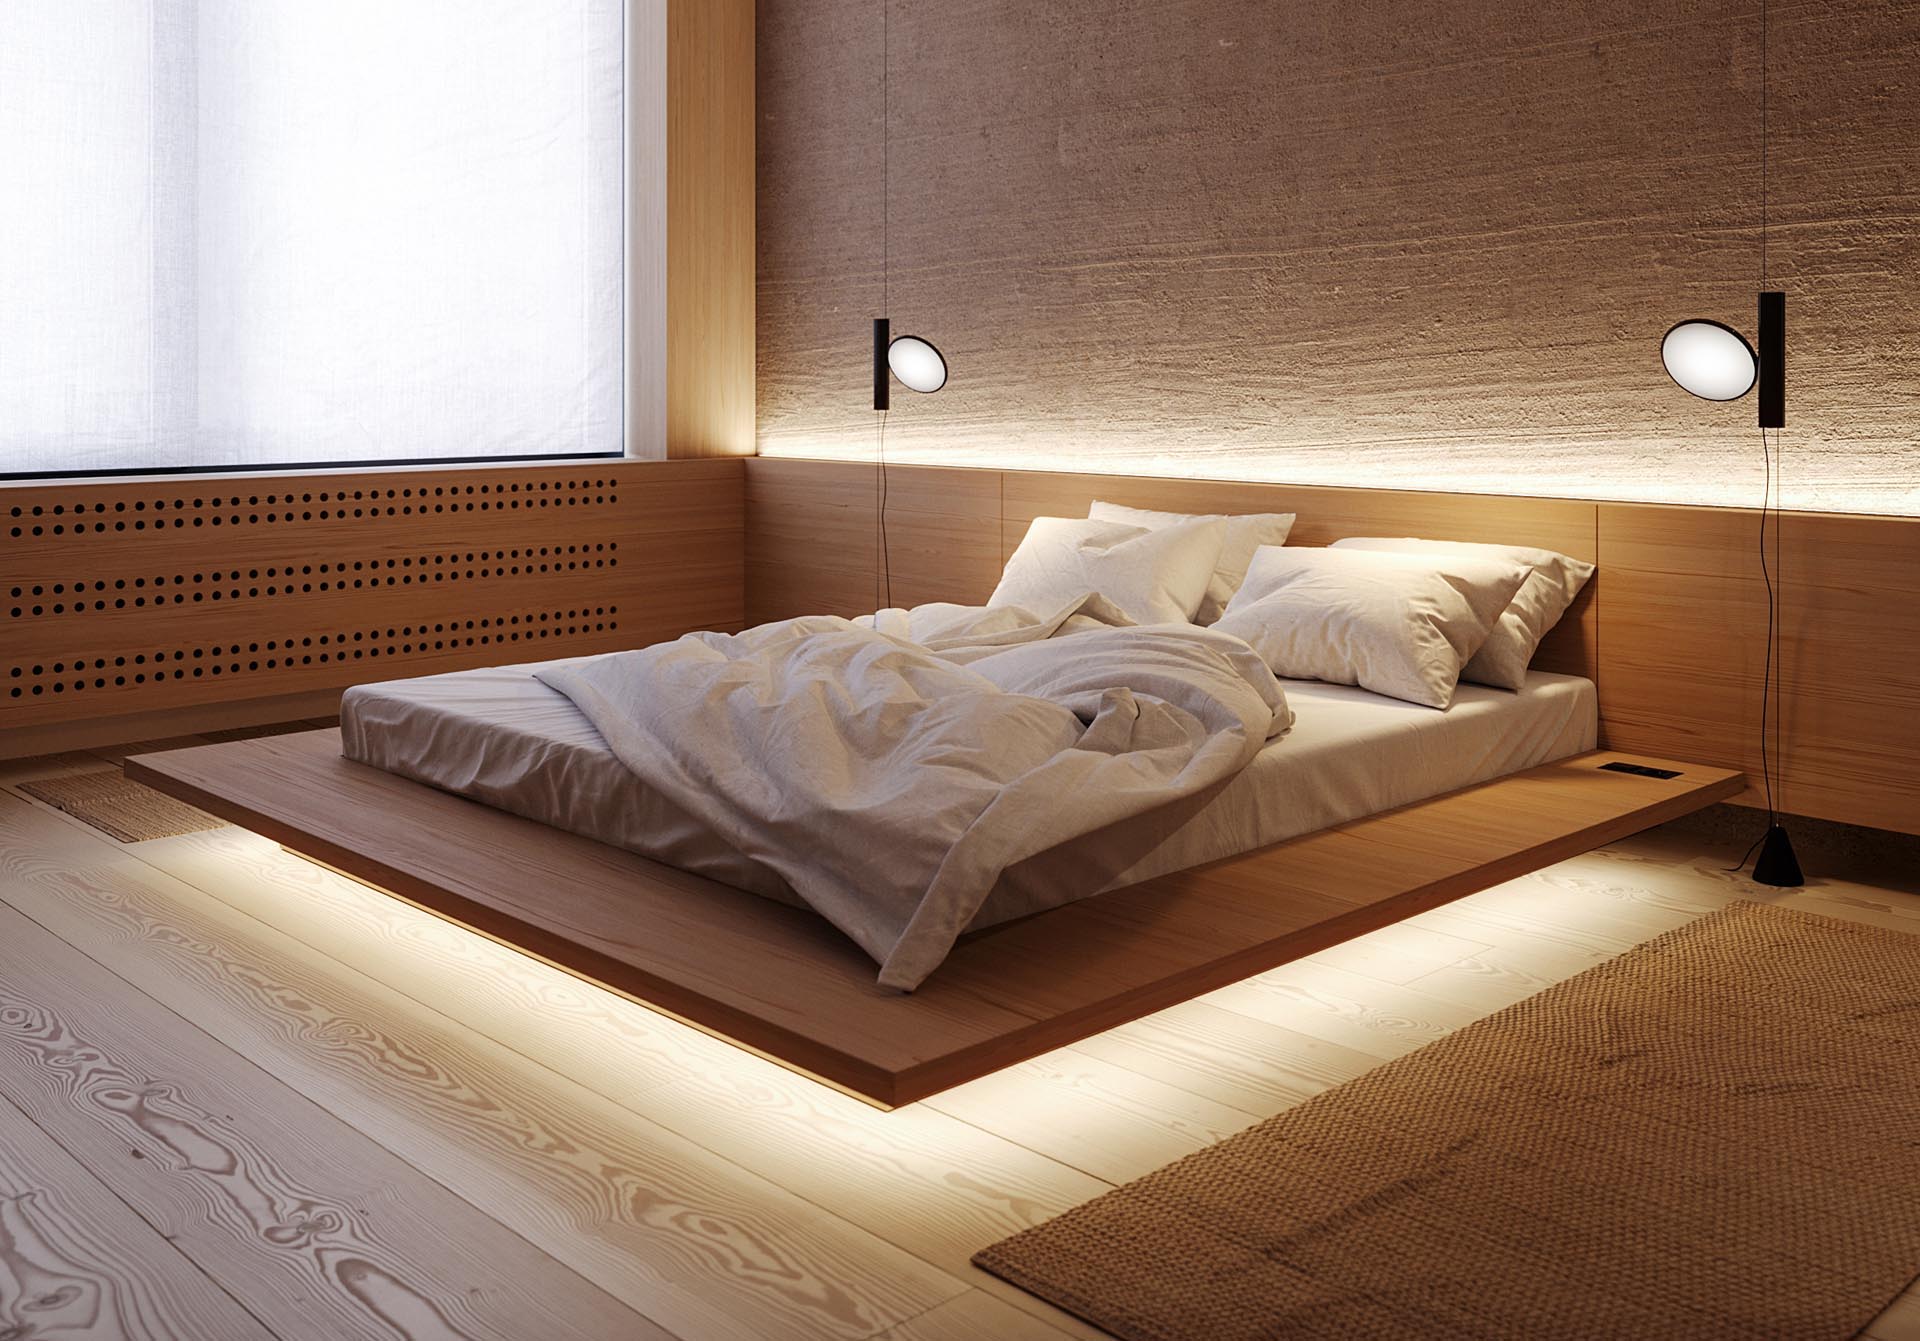 Led Lighting Allows This Bed To Appear, Led Bed Headboard Lights